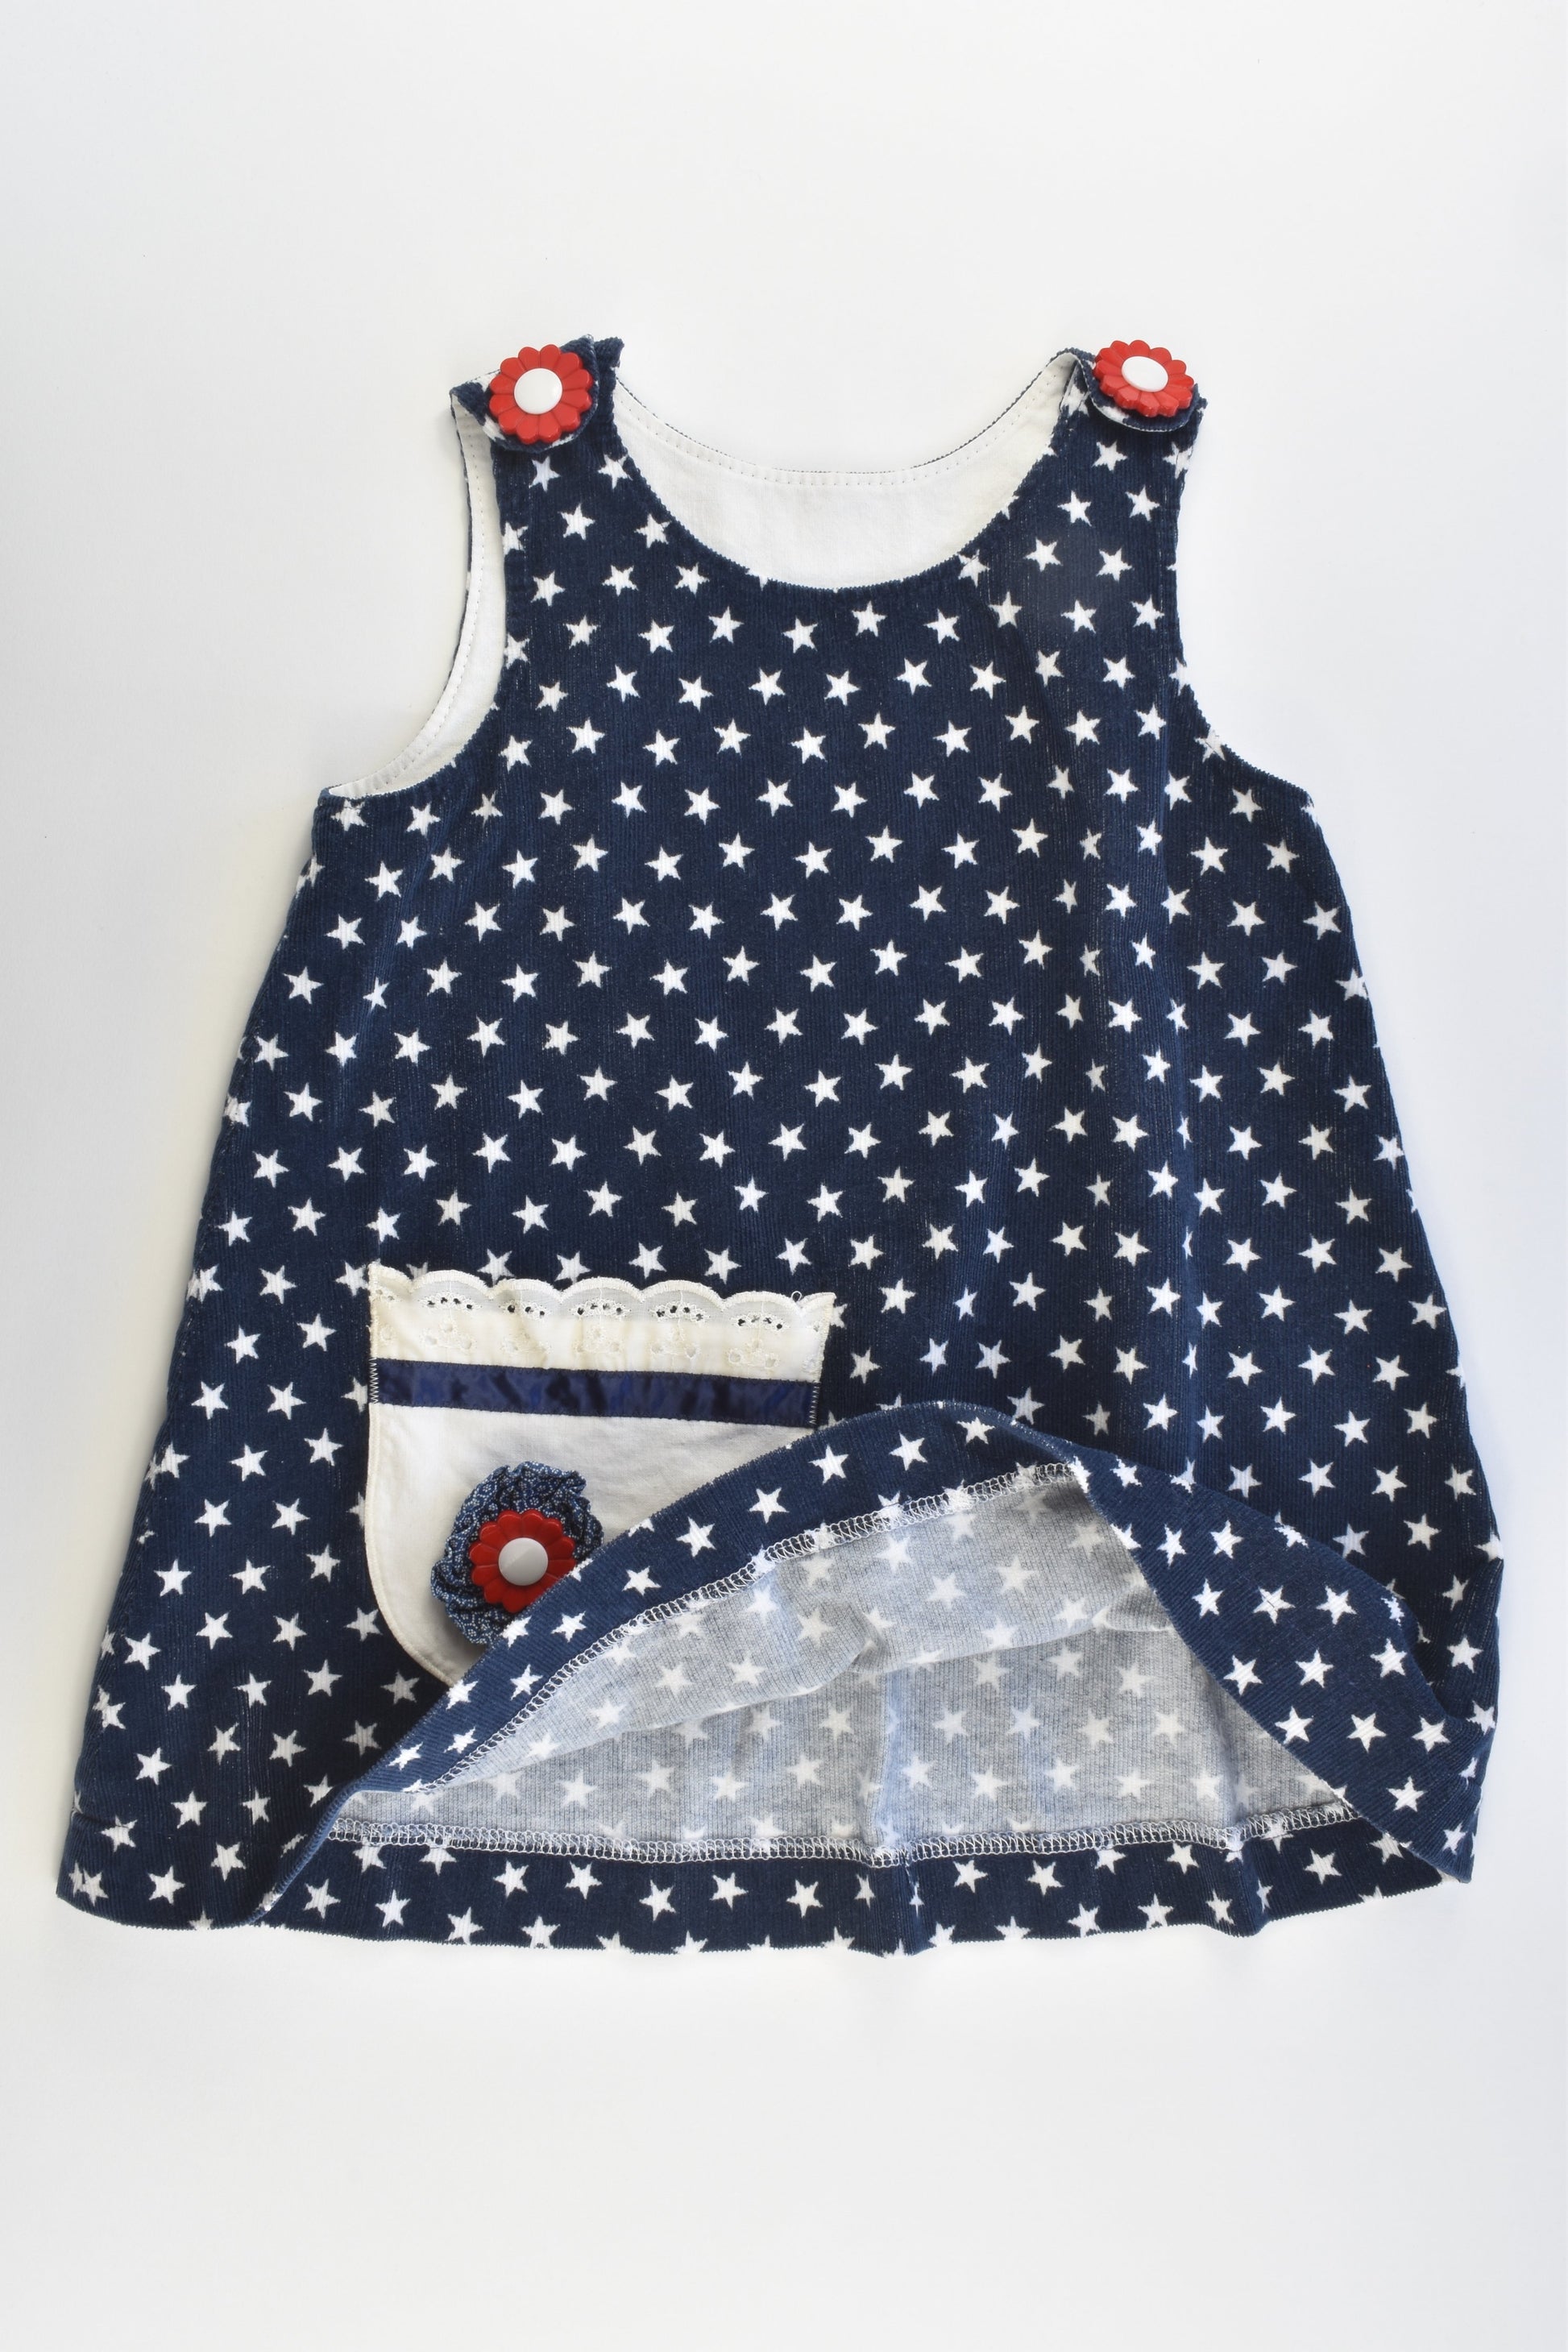 Handmade Size approx 4 Lightweight and Stretchy Stars Cord Dress